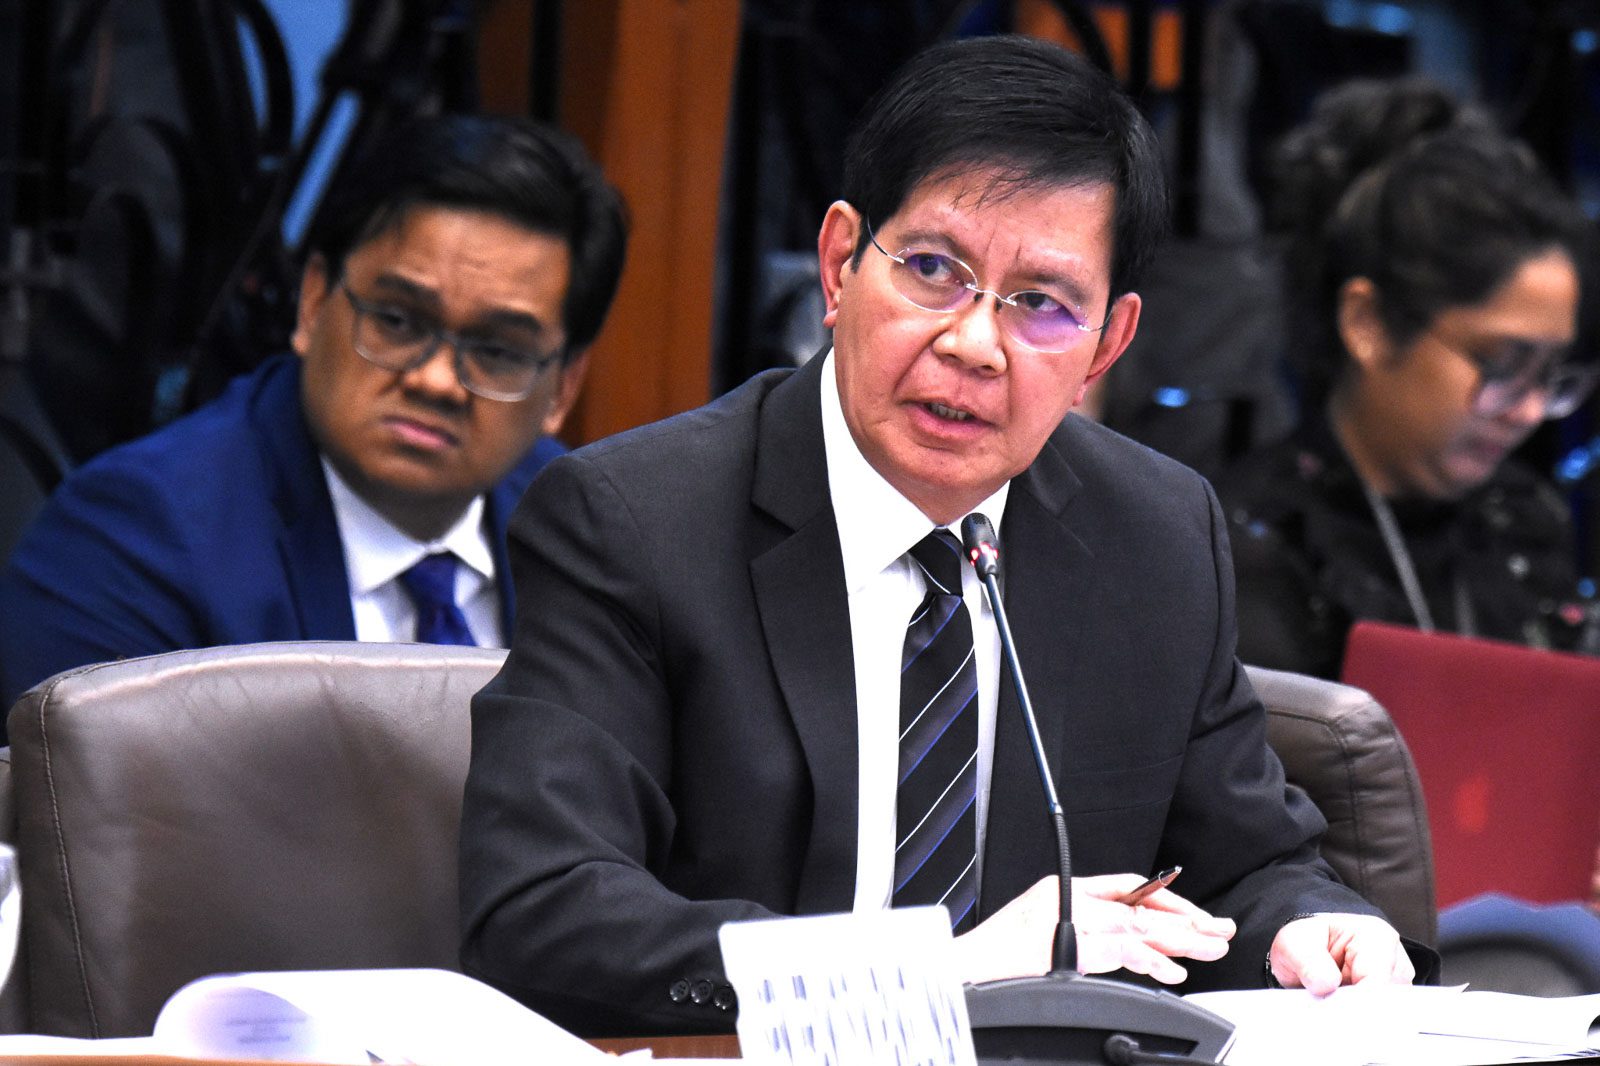 ‘Worst is yet to come unless DOH, FDA act with urgency’ says Lacson